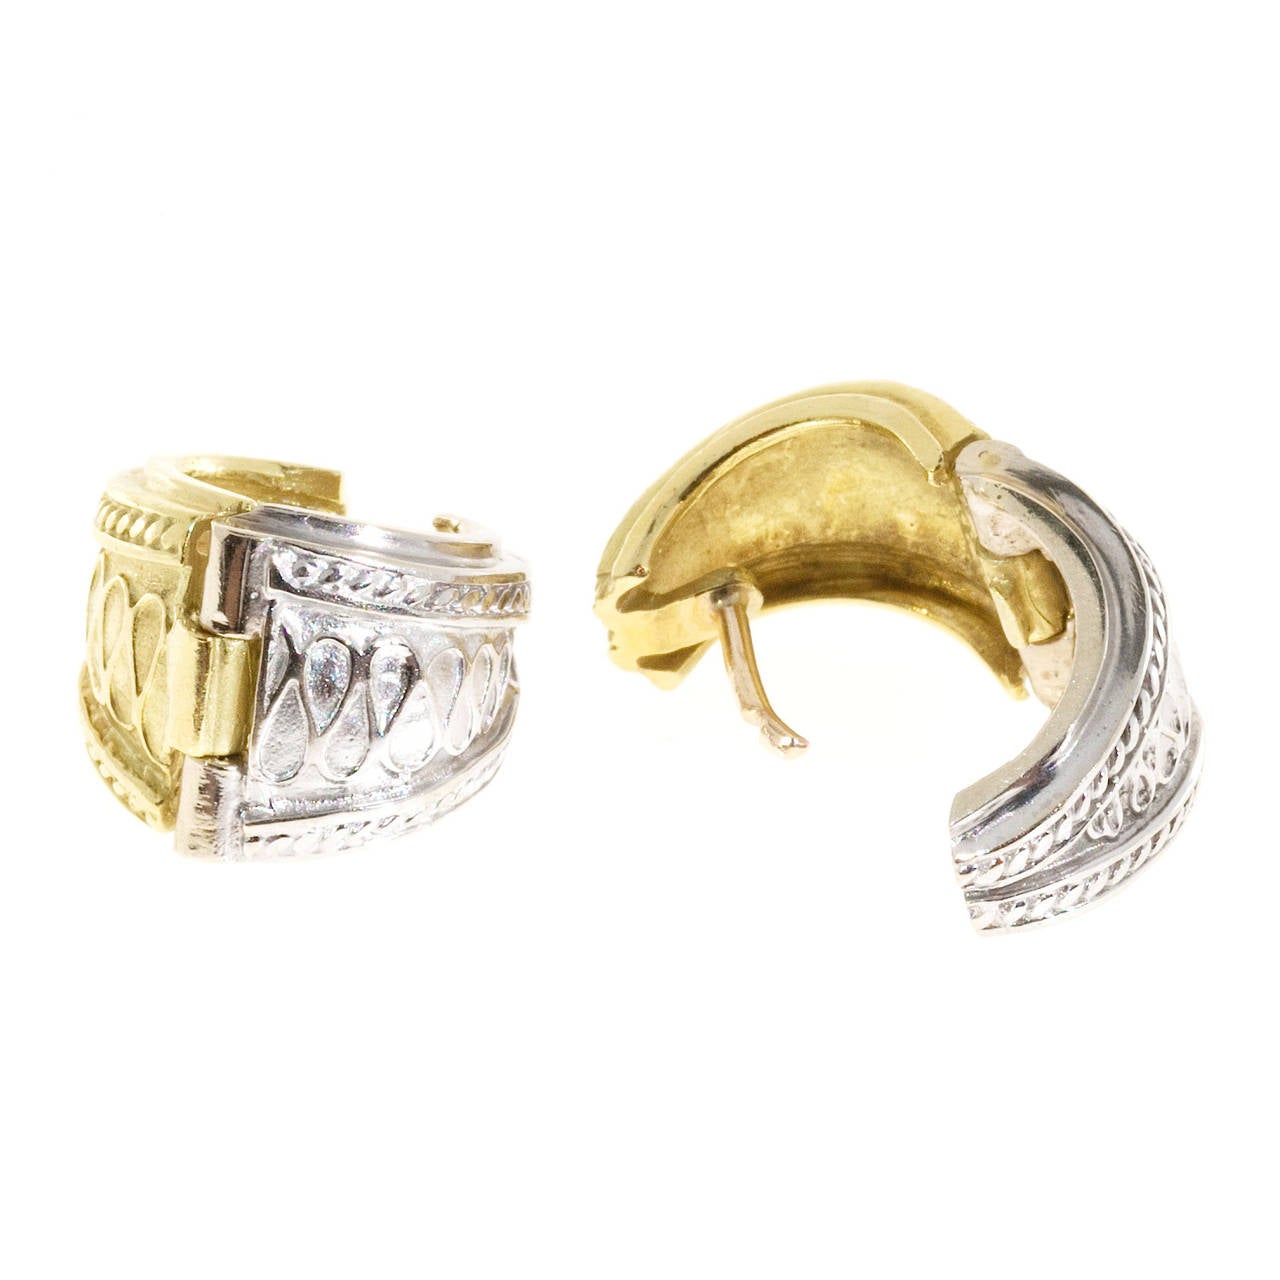 Yellow and white gold Seidengang huggie style earrings. Hinged at the bottom with fixed post.

18k yellow and white gold
Tested and stamped: 18k
Hallmark: SG
9.8 grams
Top to bottom: 14.58mm or .57 inch
Width: 11.41mm or .45 inch
Depth: